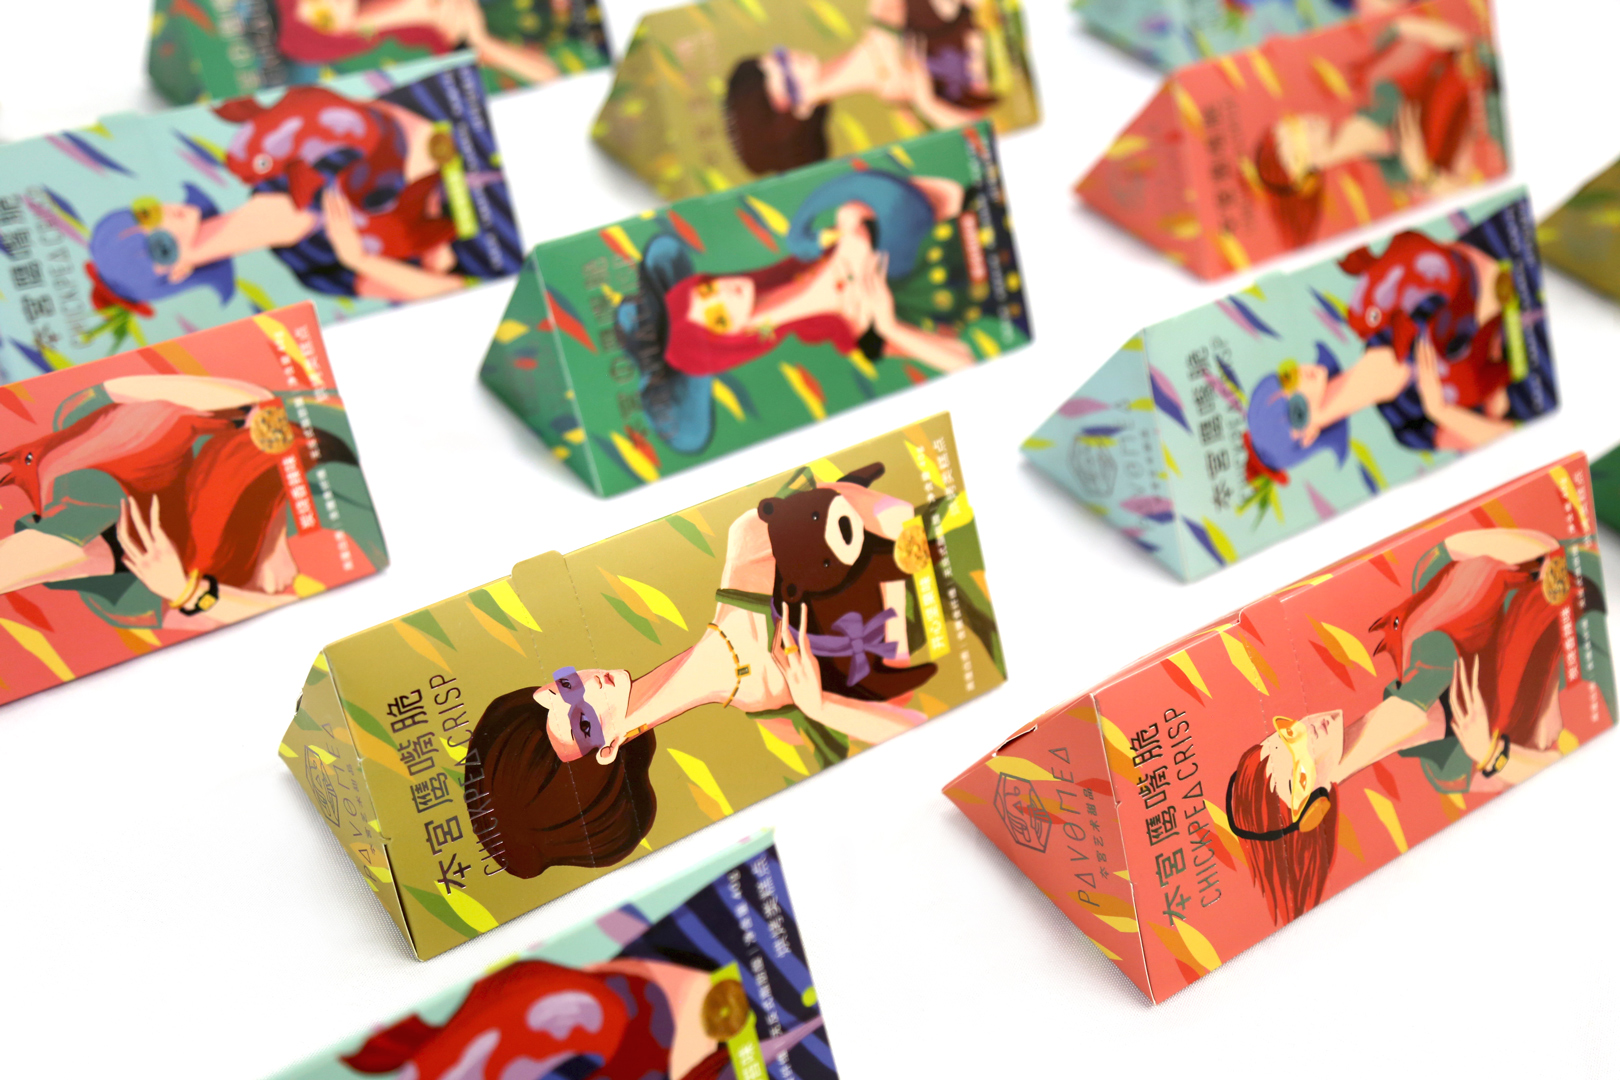 MUSE Design Winners - PavoMea Chickpea Crisp Package